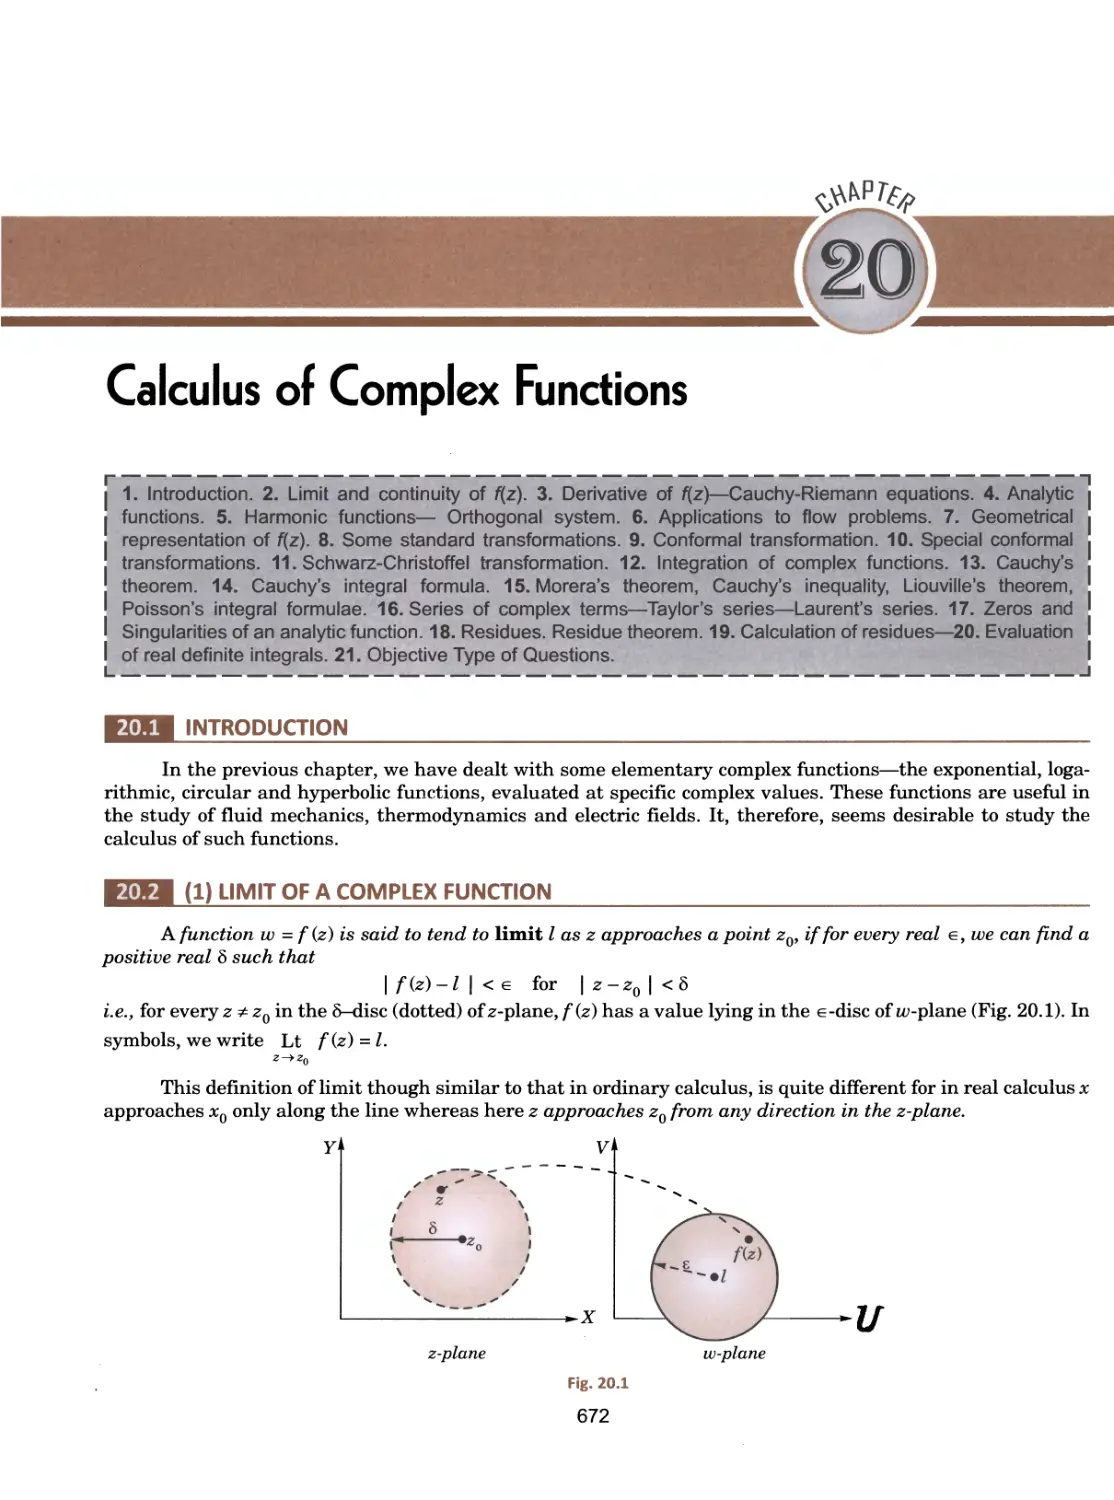 20.Calculus of Complex Functions 672